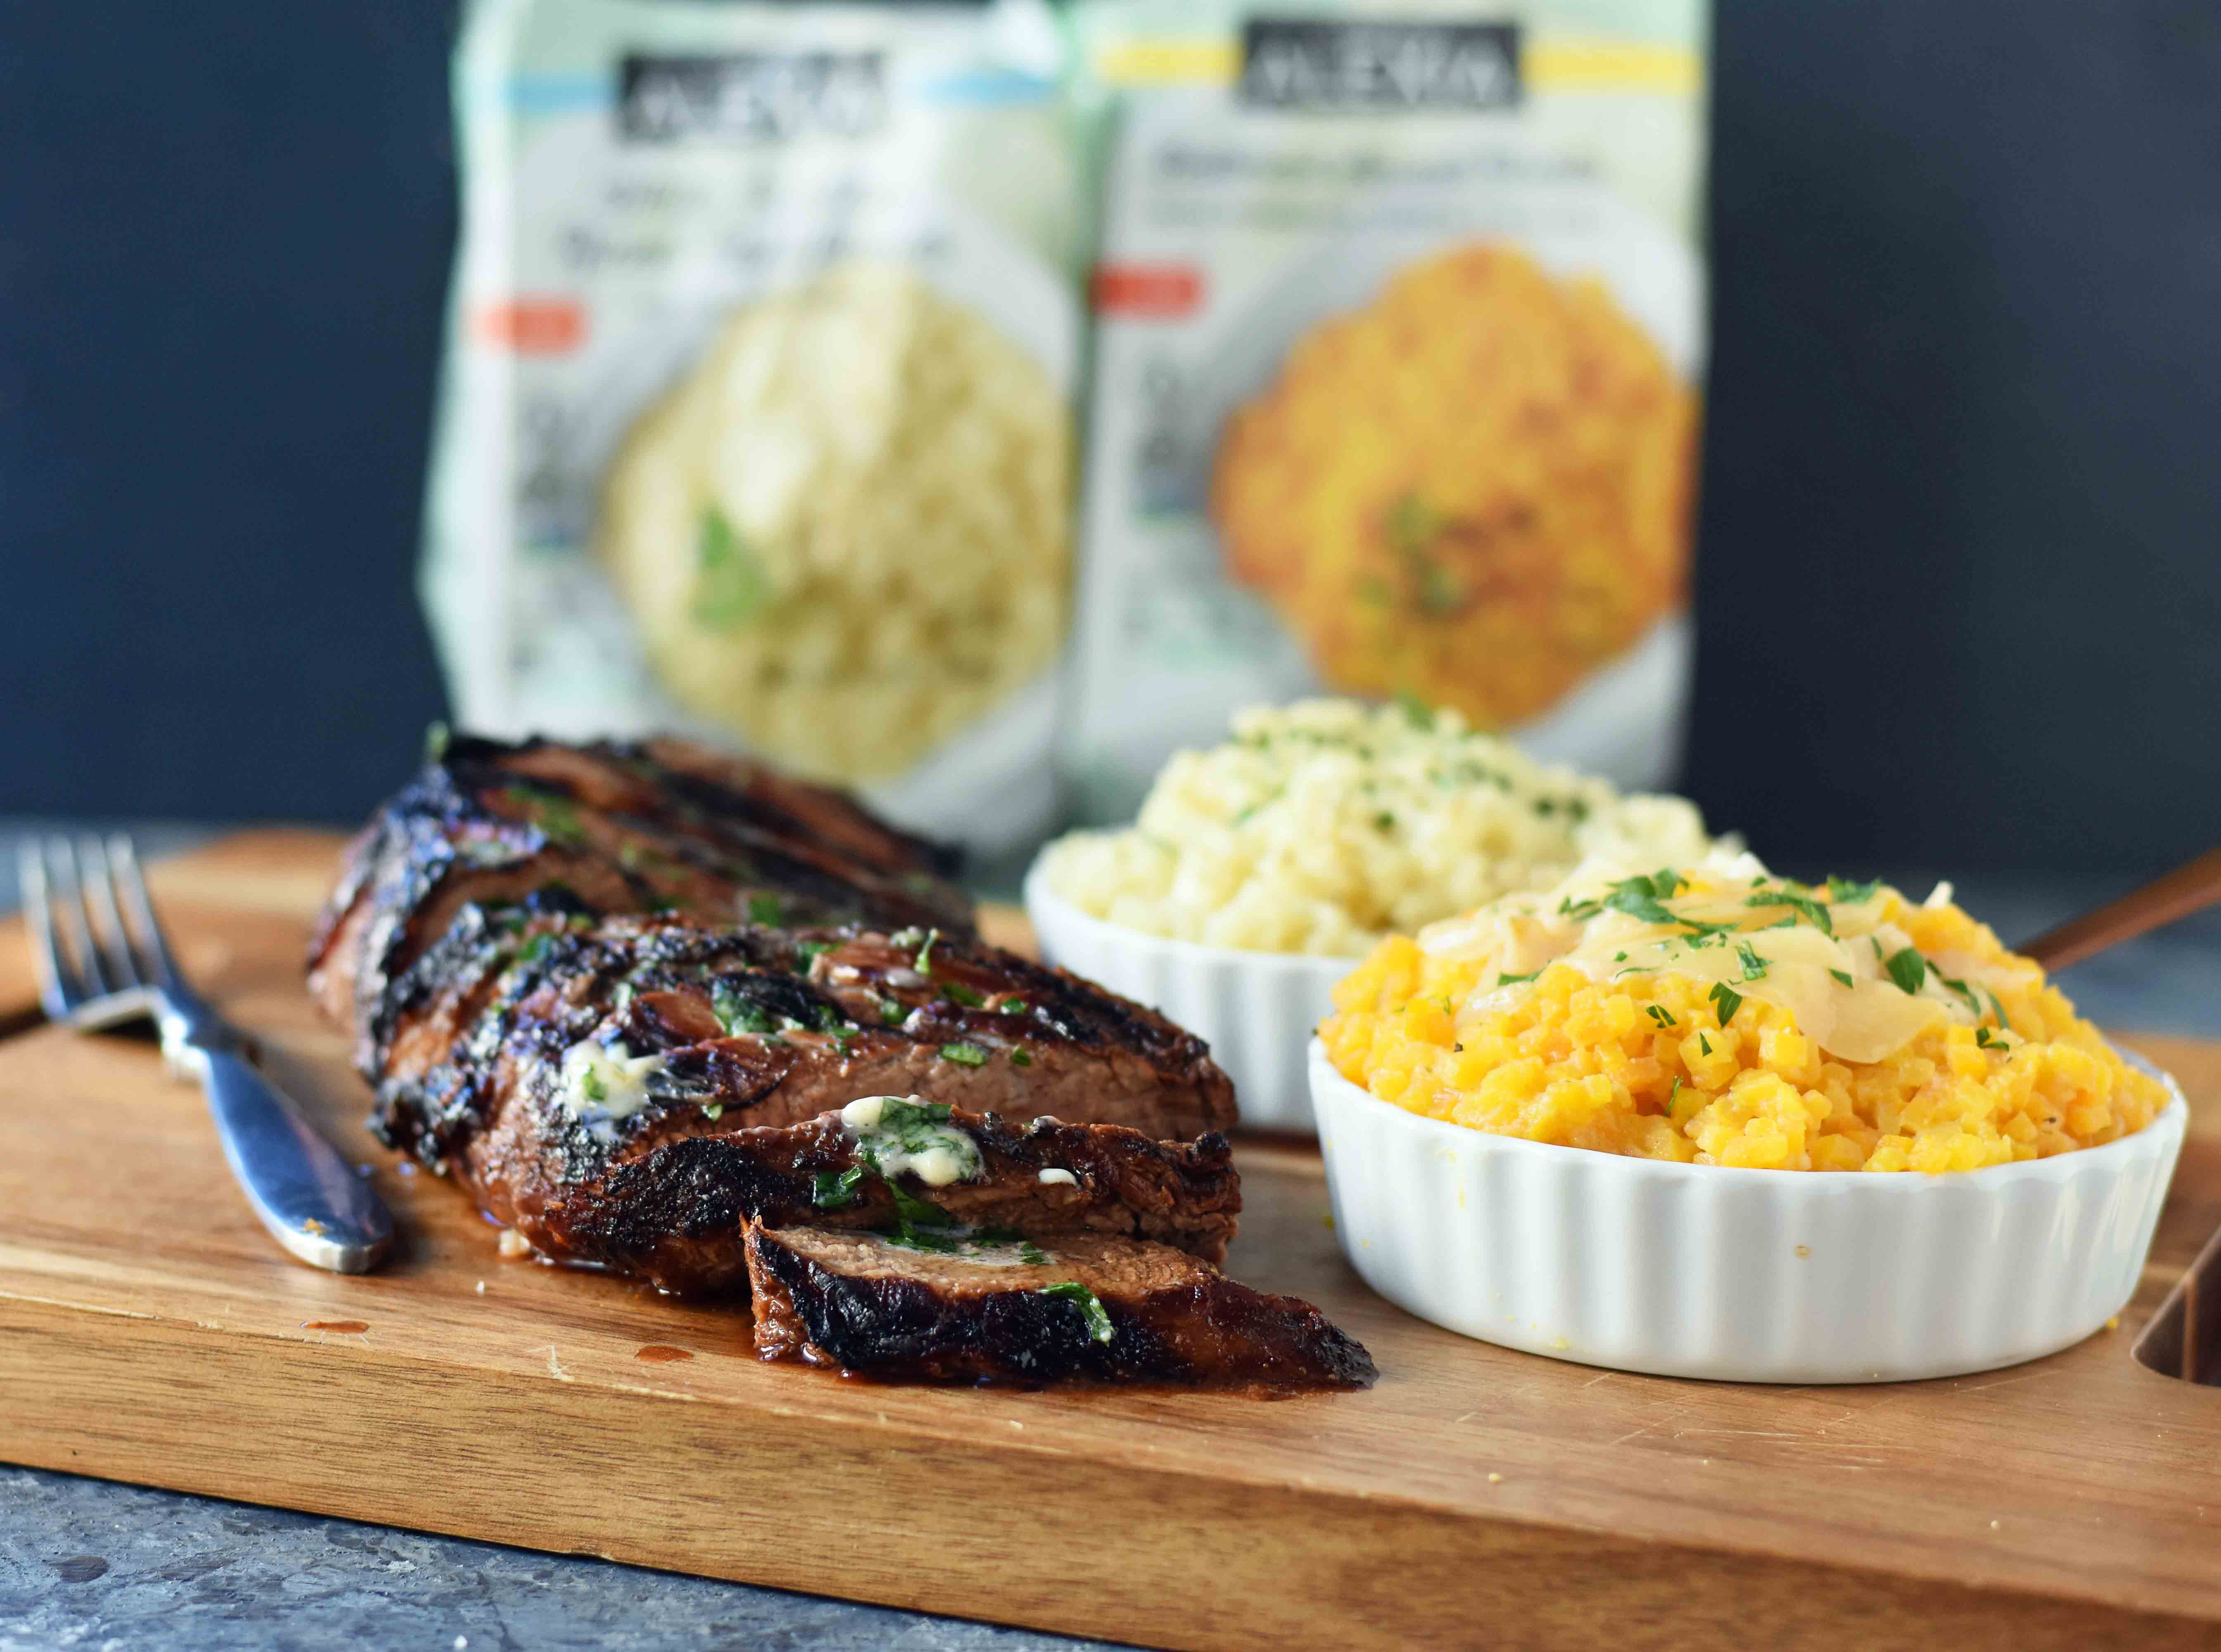 Grilled Tri-Tip Steak Marinade. How to make a juicy and flavorful tri-tip steak on the grill paired with Alexia premium side dishes. www.modernhoney.com